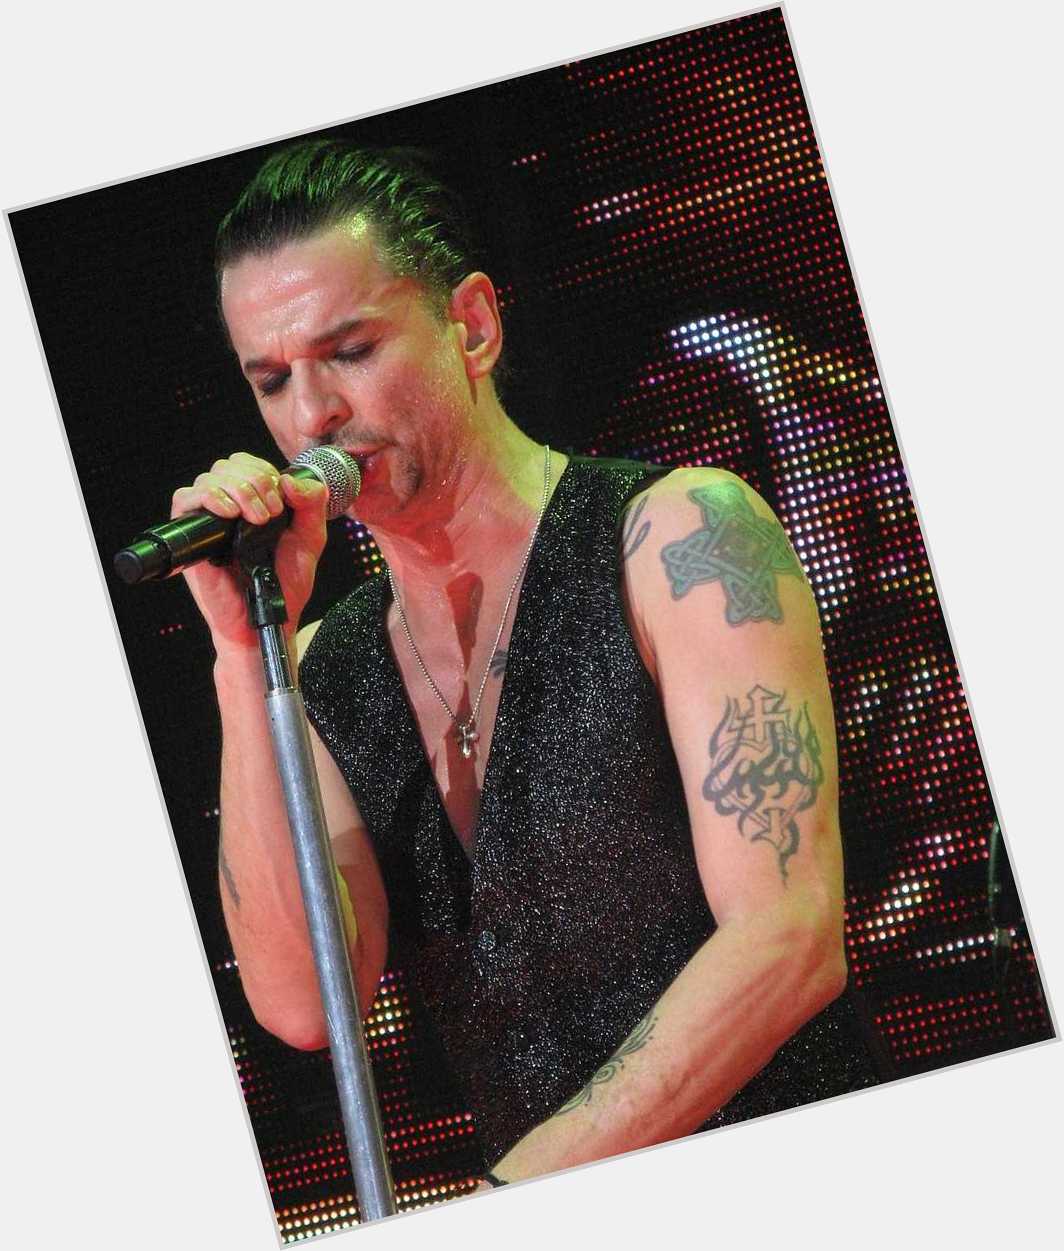 Happy 57th birthday to Depeche Mode front man Dave Gahan! What\s your favorite Depeche mode song?  